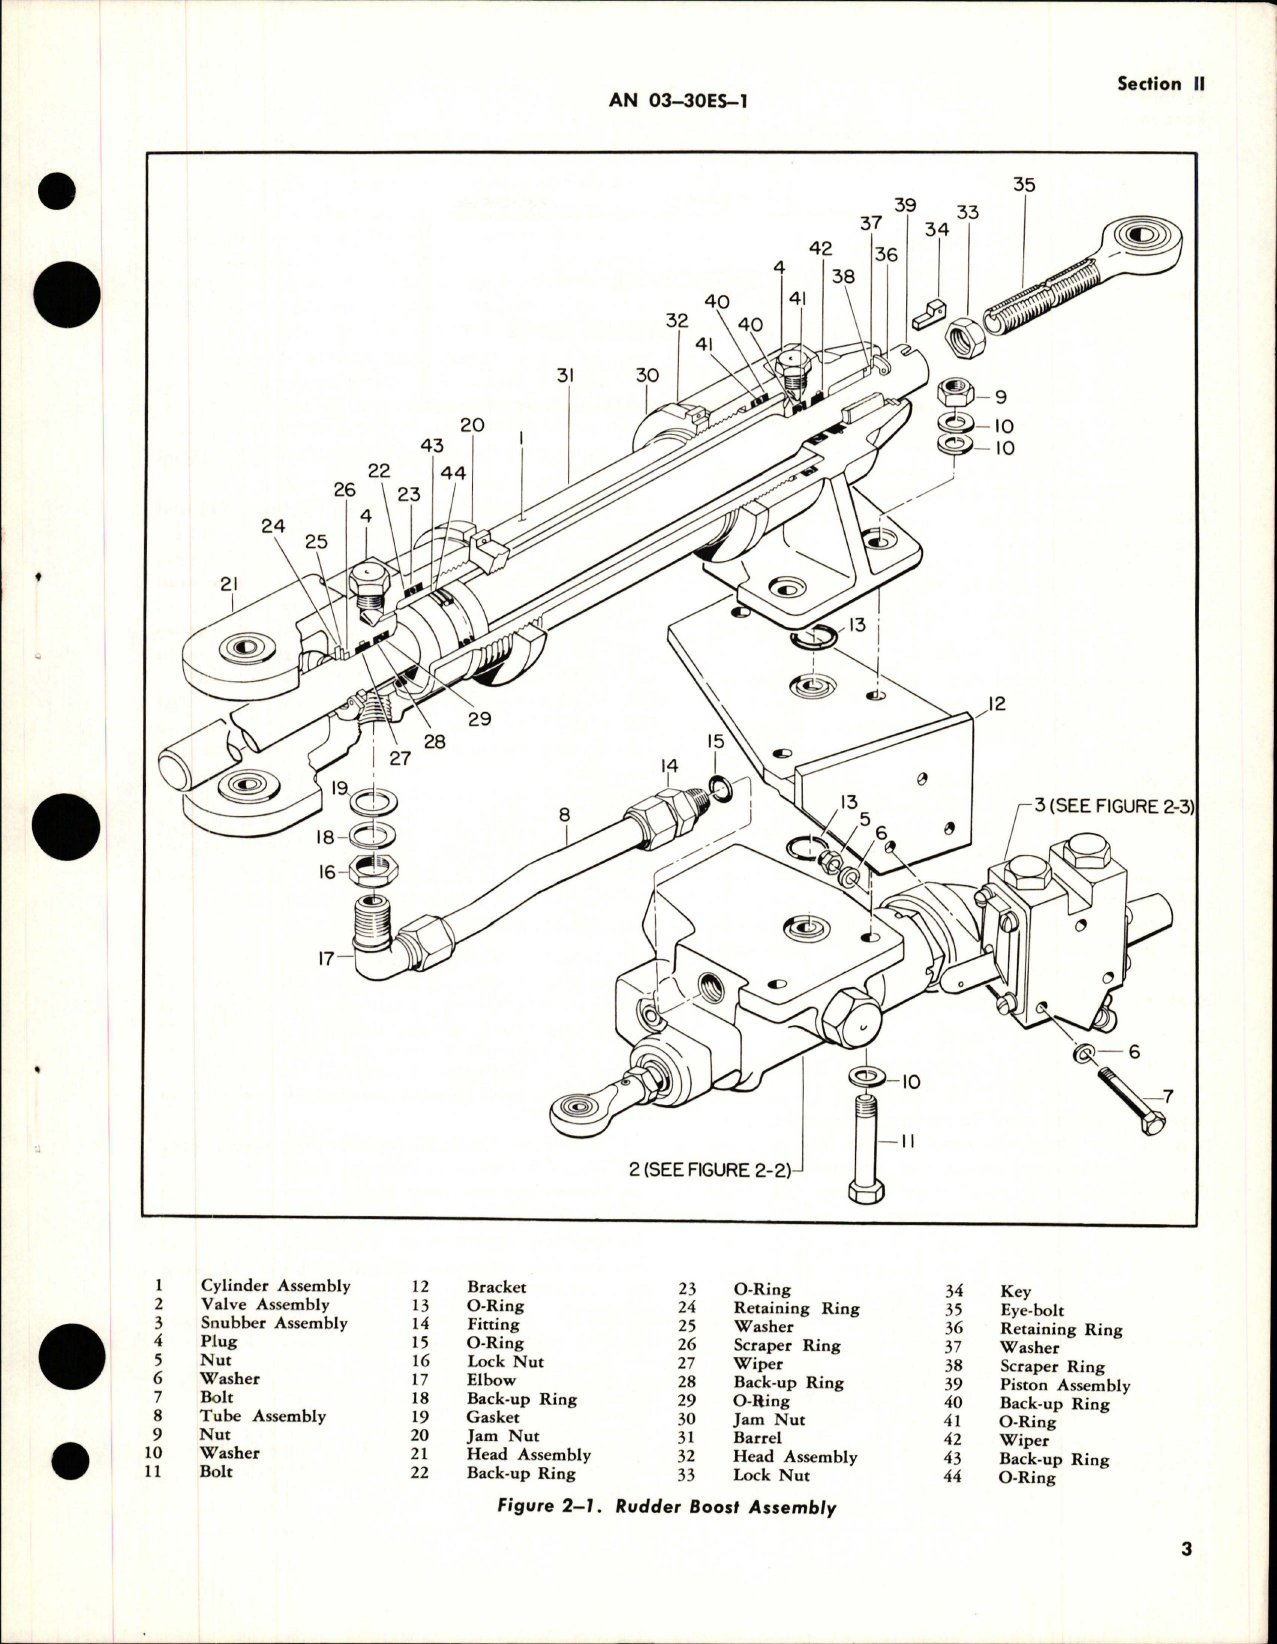 Sample page 5 from AirCorps Library document: Overhaul Instructions for Surface Control Boost Assembly - Parts 40-8047011-89 and 40-8047011-99 